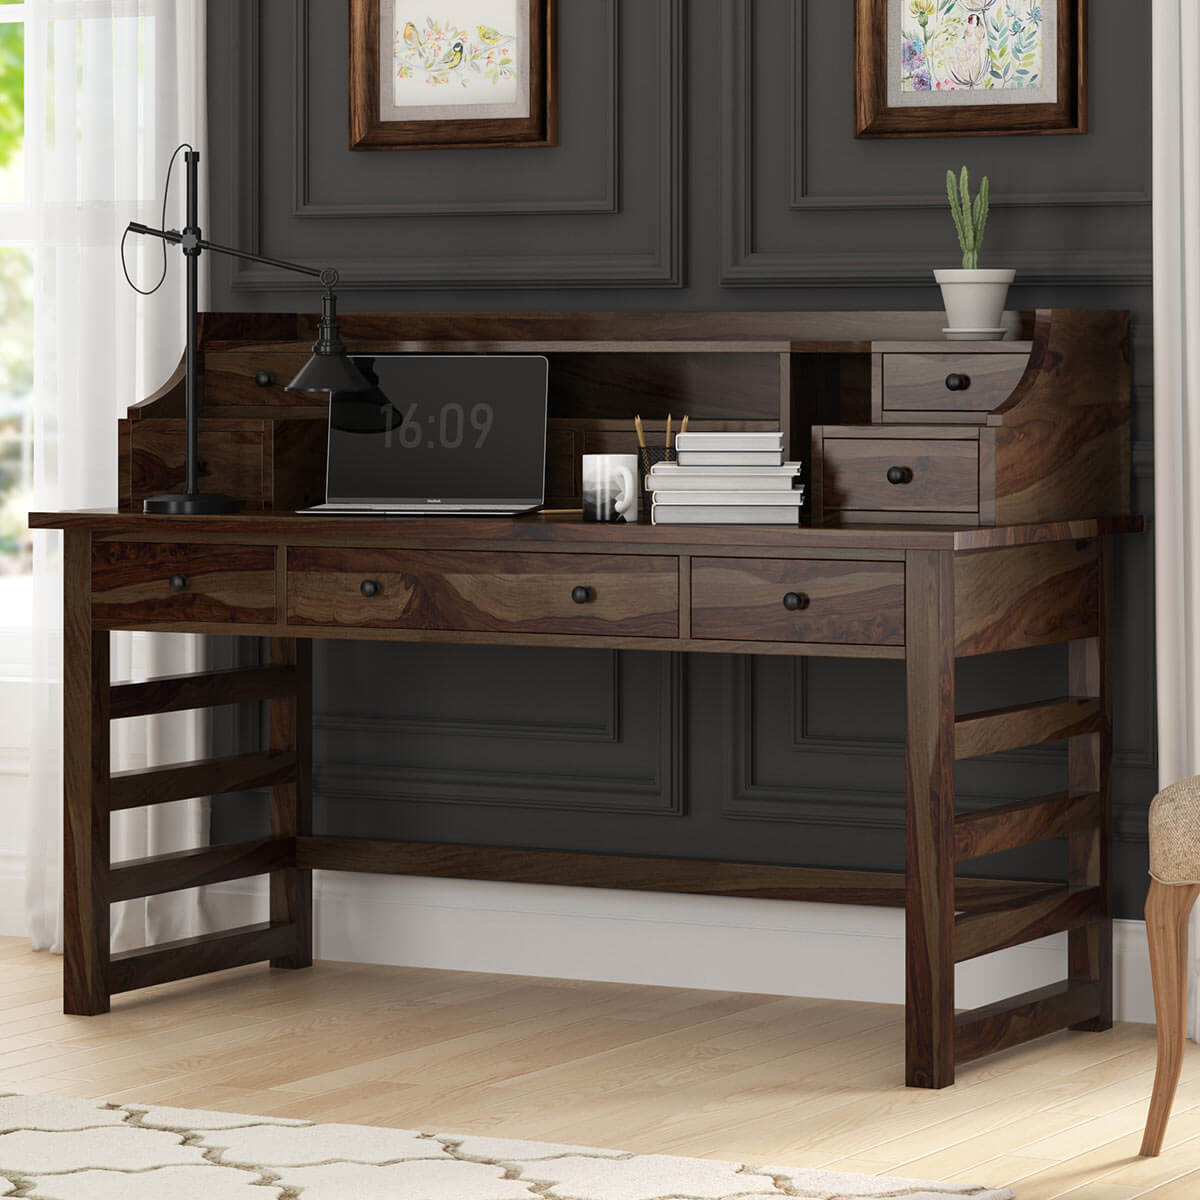 https://www.sierralivingconcepts.com/images/thumbs/0399535_everglades-rustic-solid-executive-writing-desk-with-small-hutch.jpeg